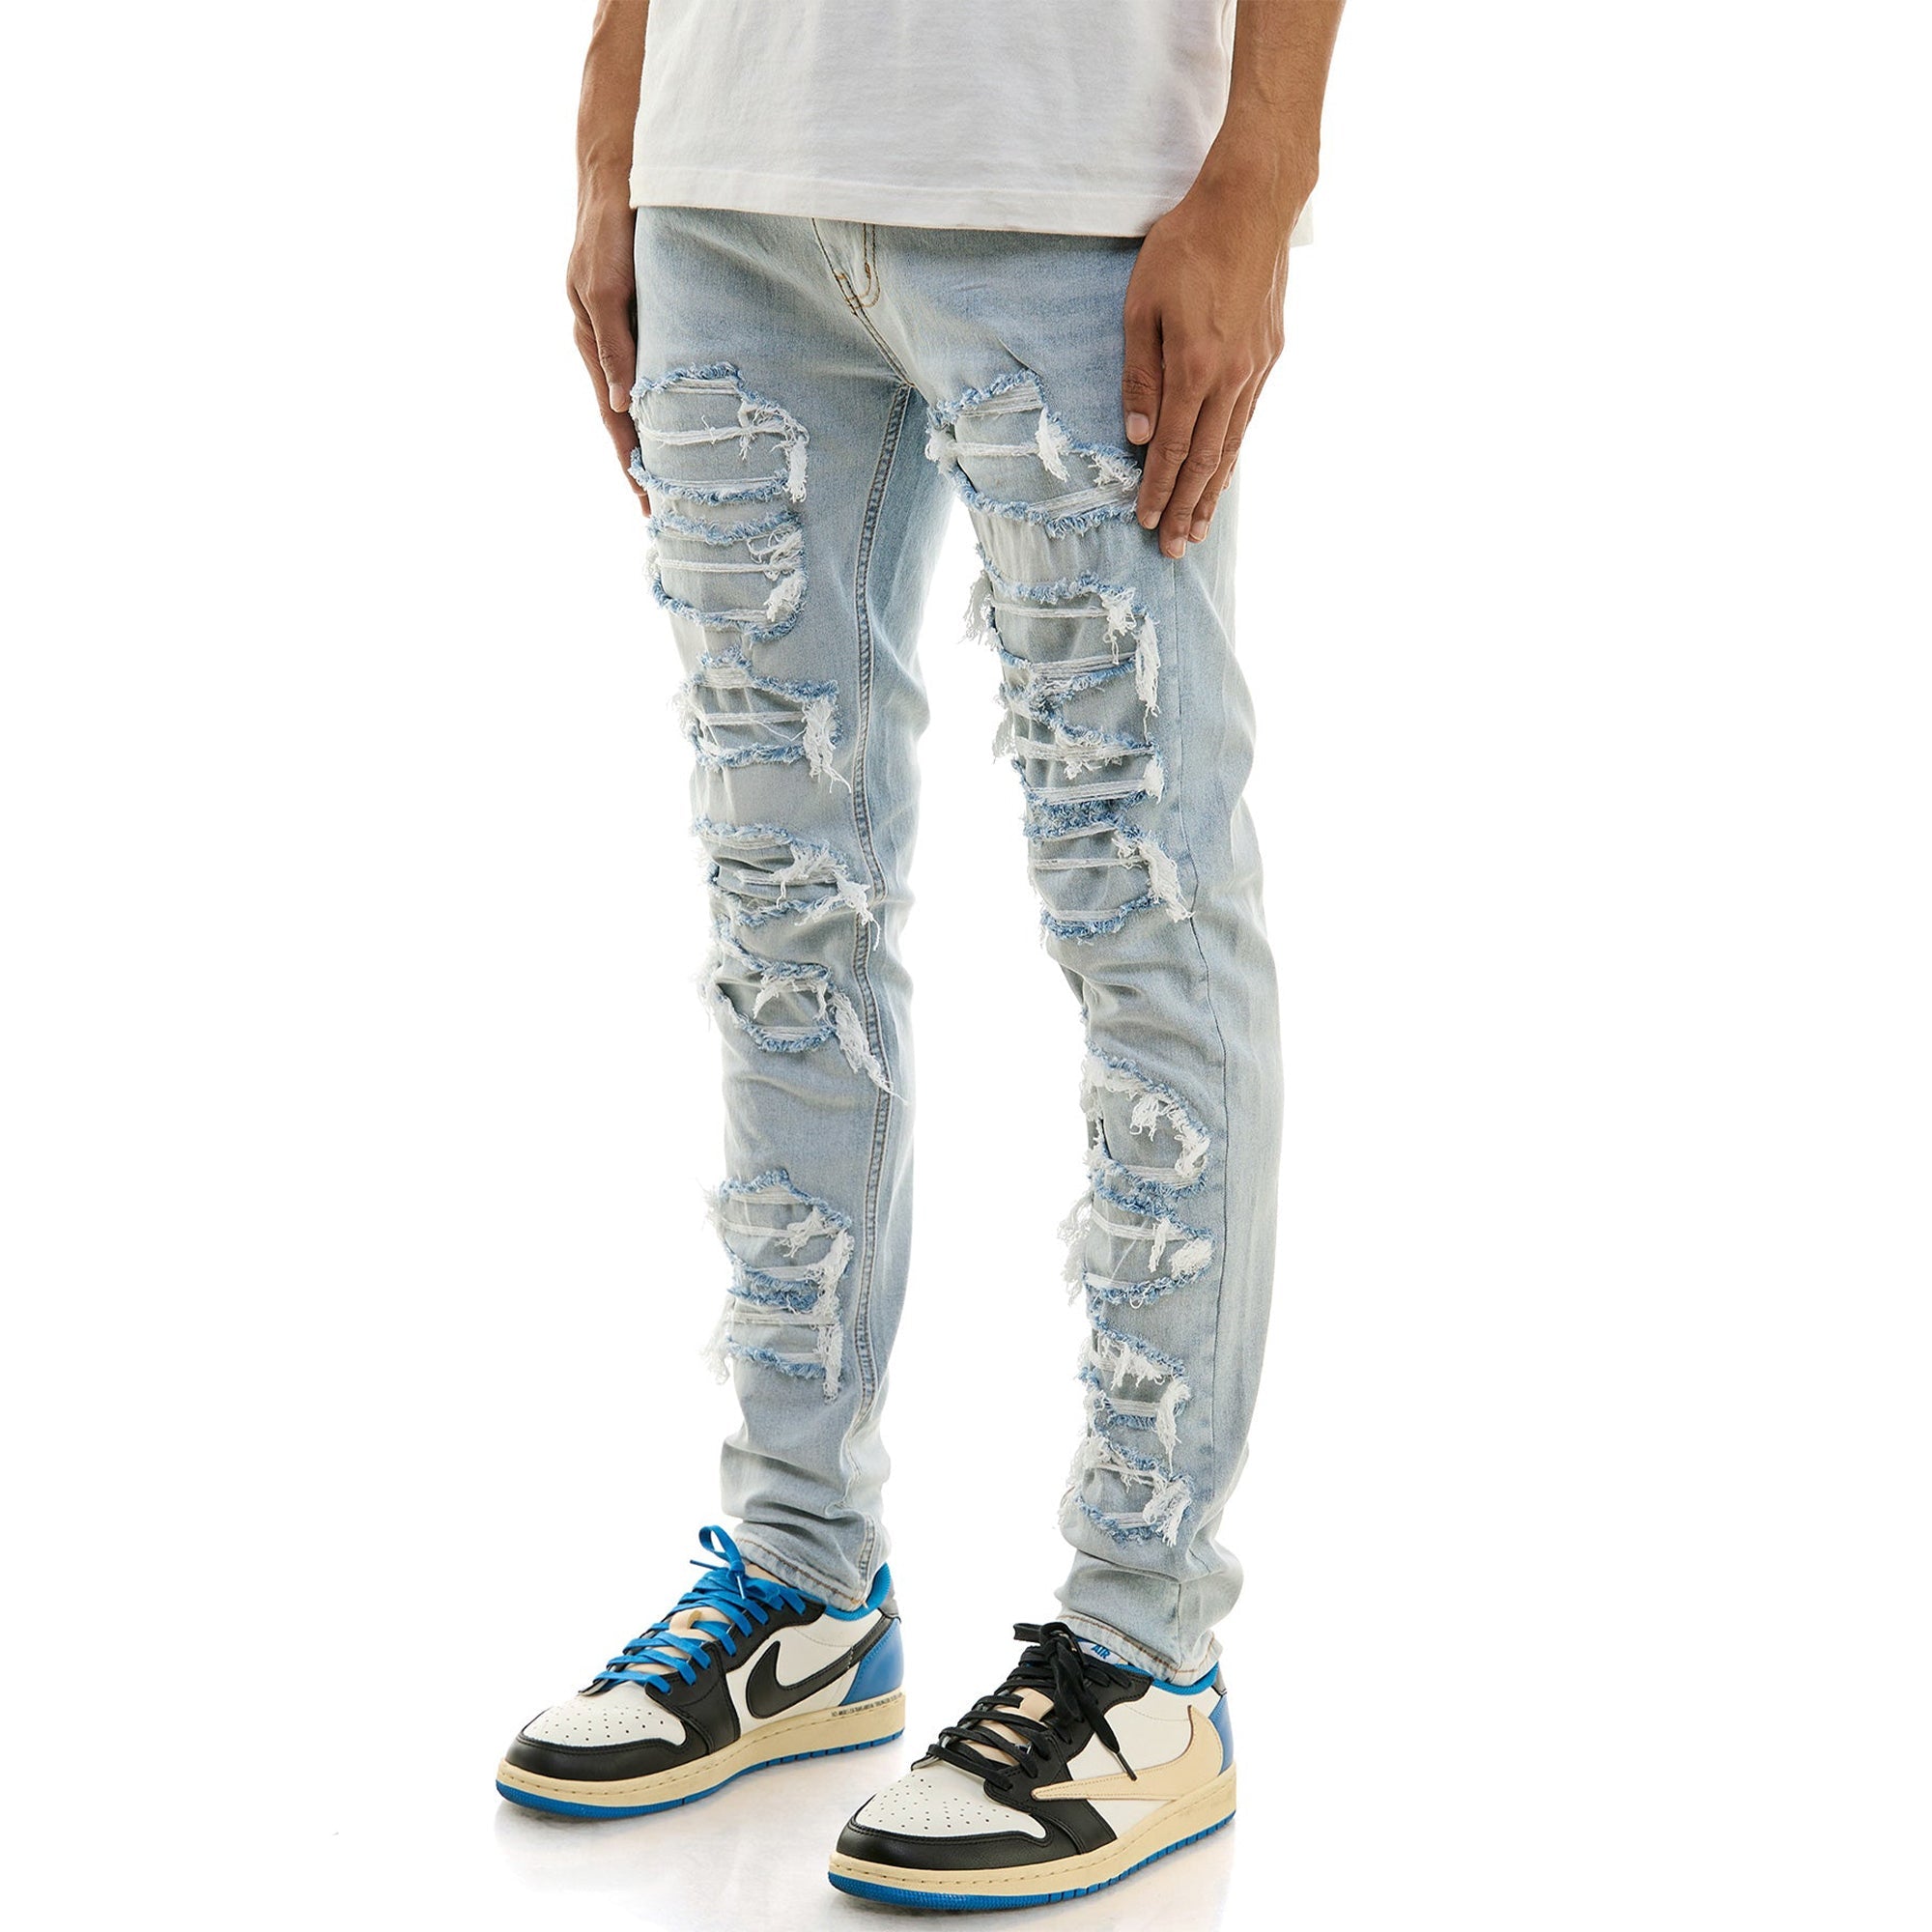 KDNK Men Under Patched High Skinny Jeans (Blue)-Nexus Clothing